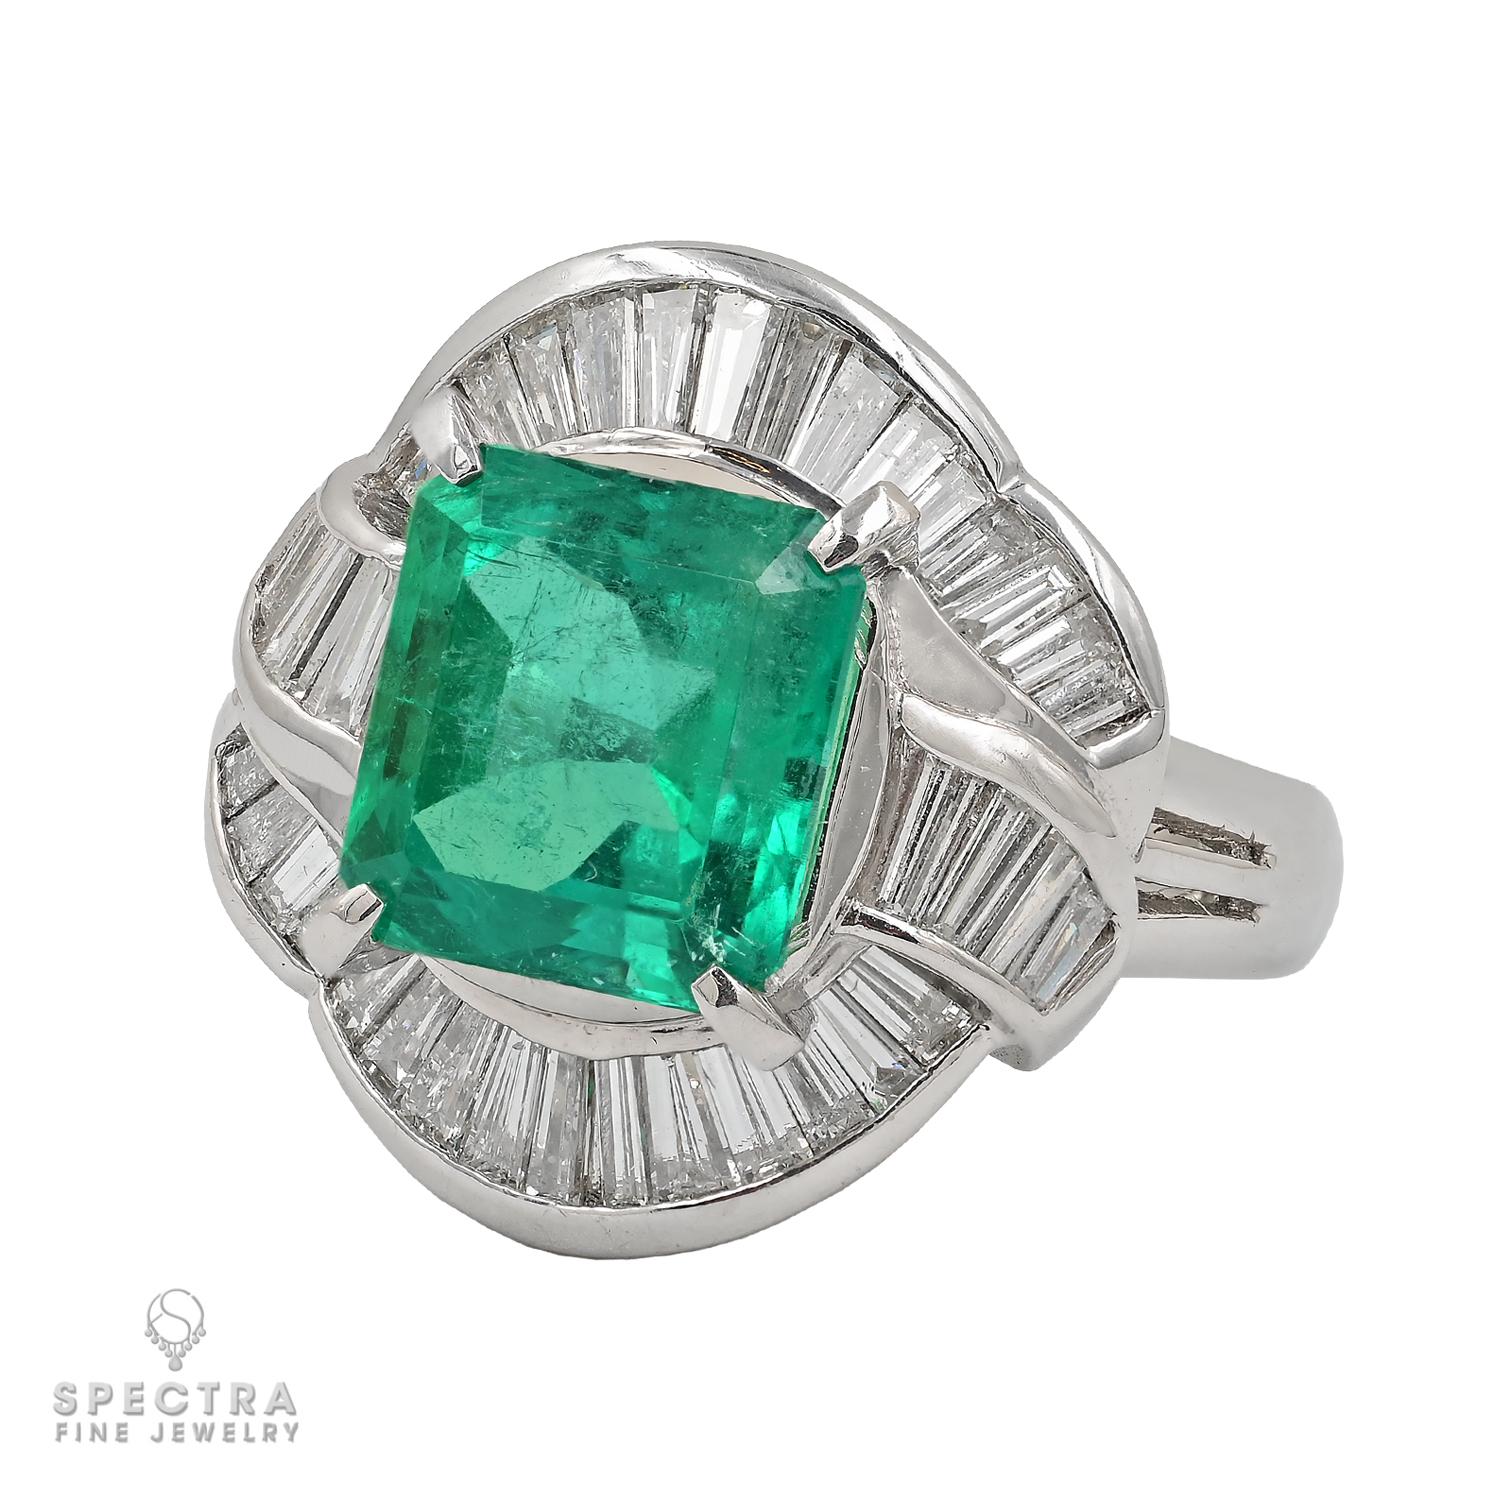 Introducing our exquisite Colombian Emerald Diamond Ring, featuring a stunning 3.38-carat emerald-cut Colombian Emerald, with a moderate color enhancement, certified by GIA for authenticity and quality assurance.

This captivating ring is adorned